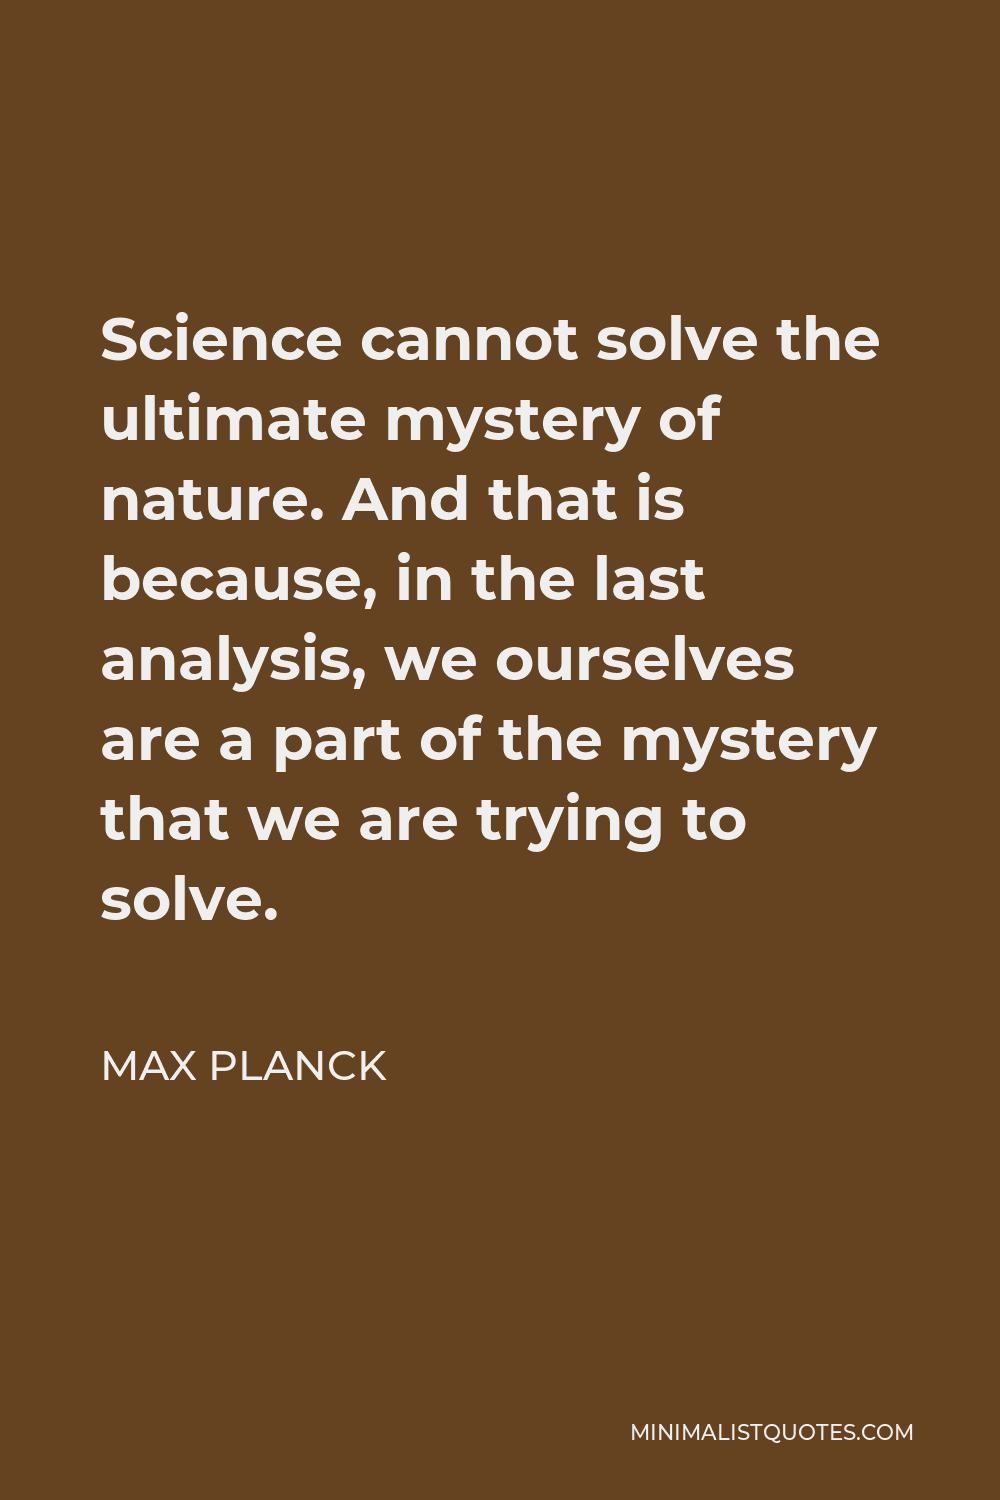 Max Planck Quote - Science cannot solve the ultimate mystery of nature. And that is because, in the last analysis, we ourselves are a part of the mystery that we are trying to solve.